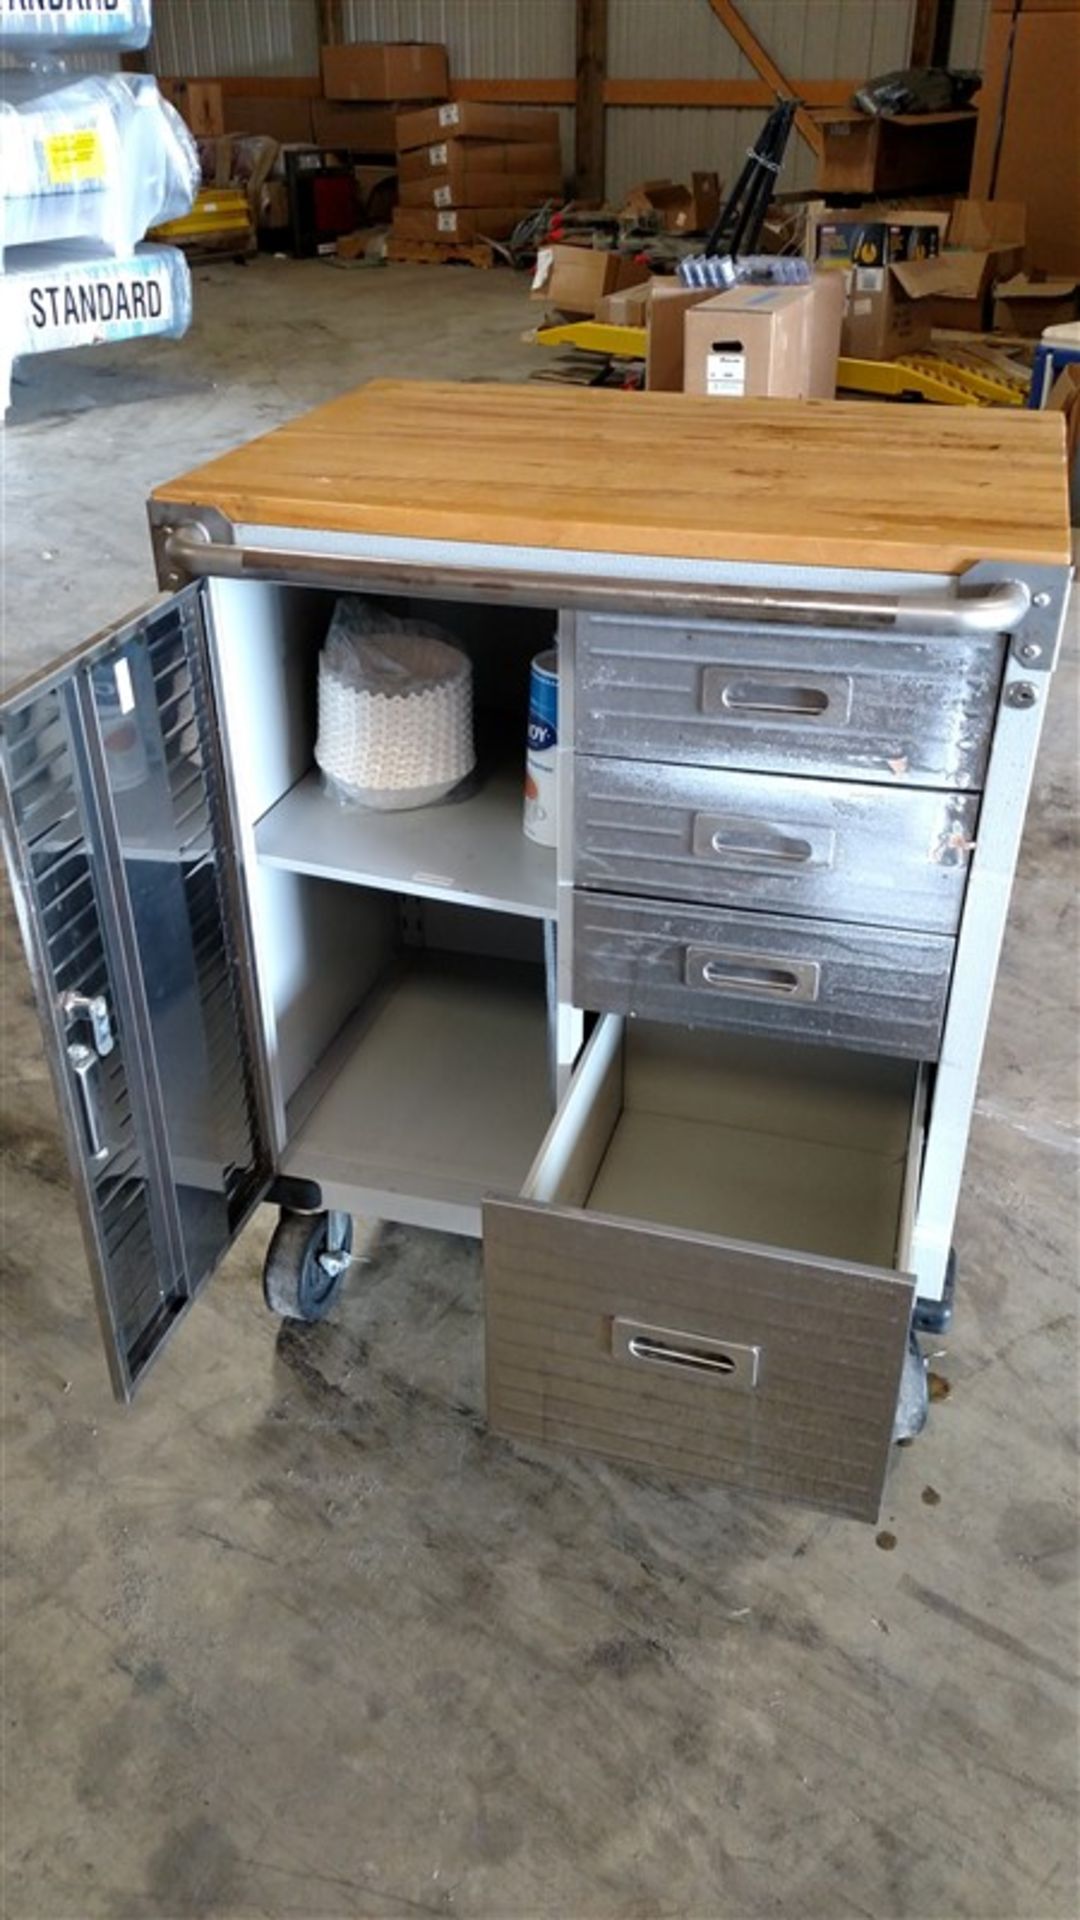 Stainless Steel / Wood Top "Coffee" Cabinet (1 x Your Bid) - Image 2 of 4